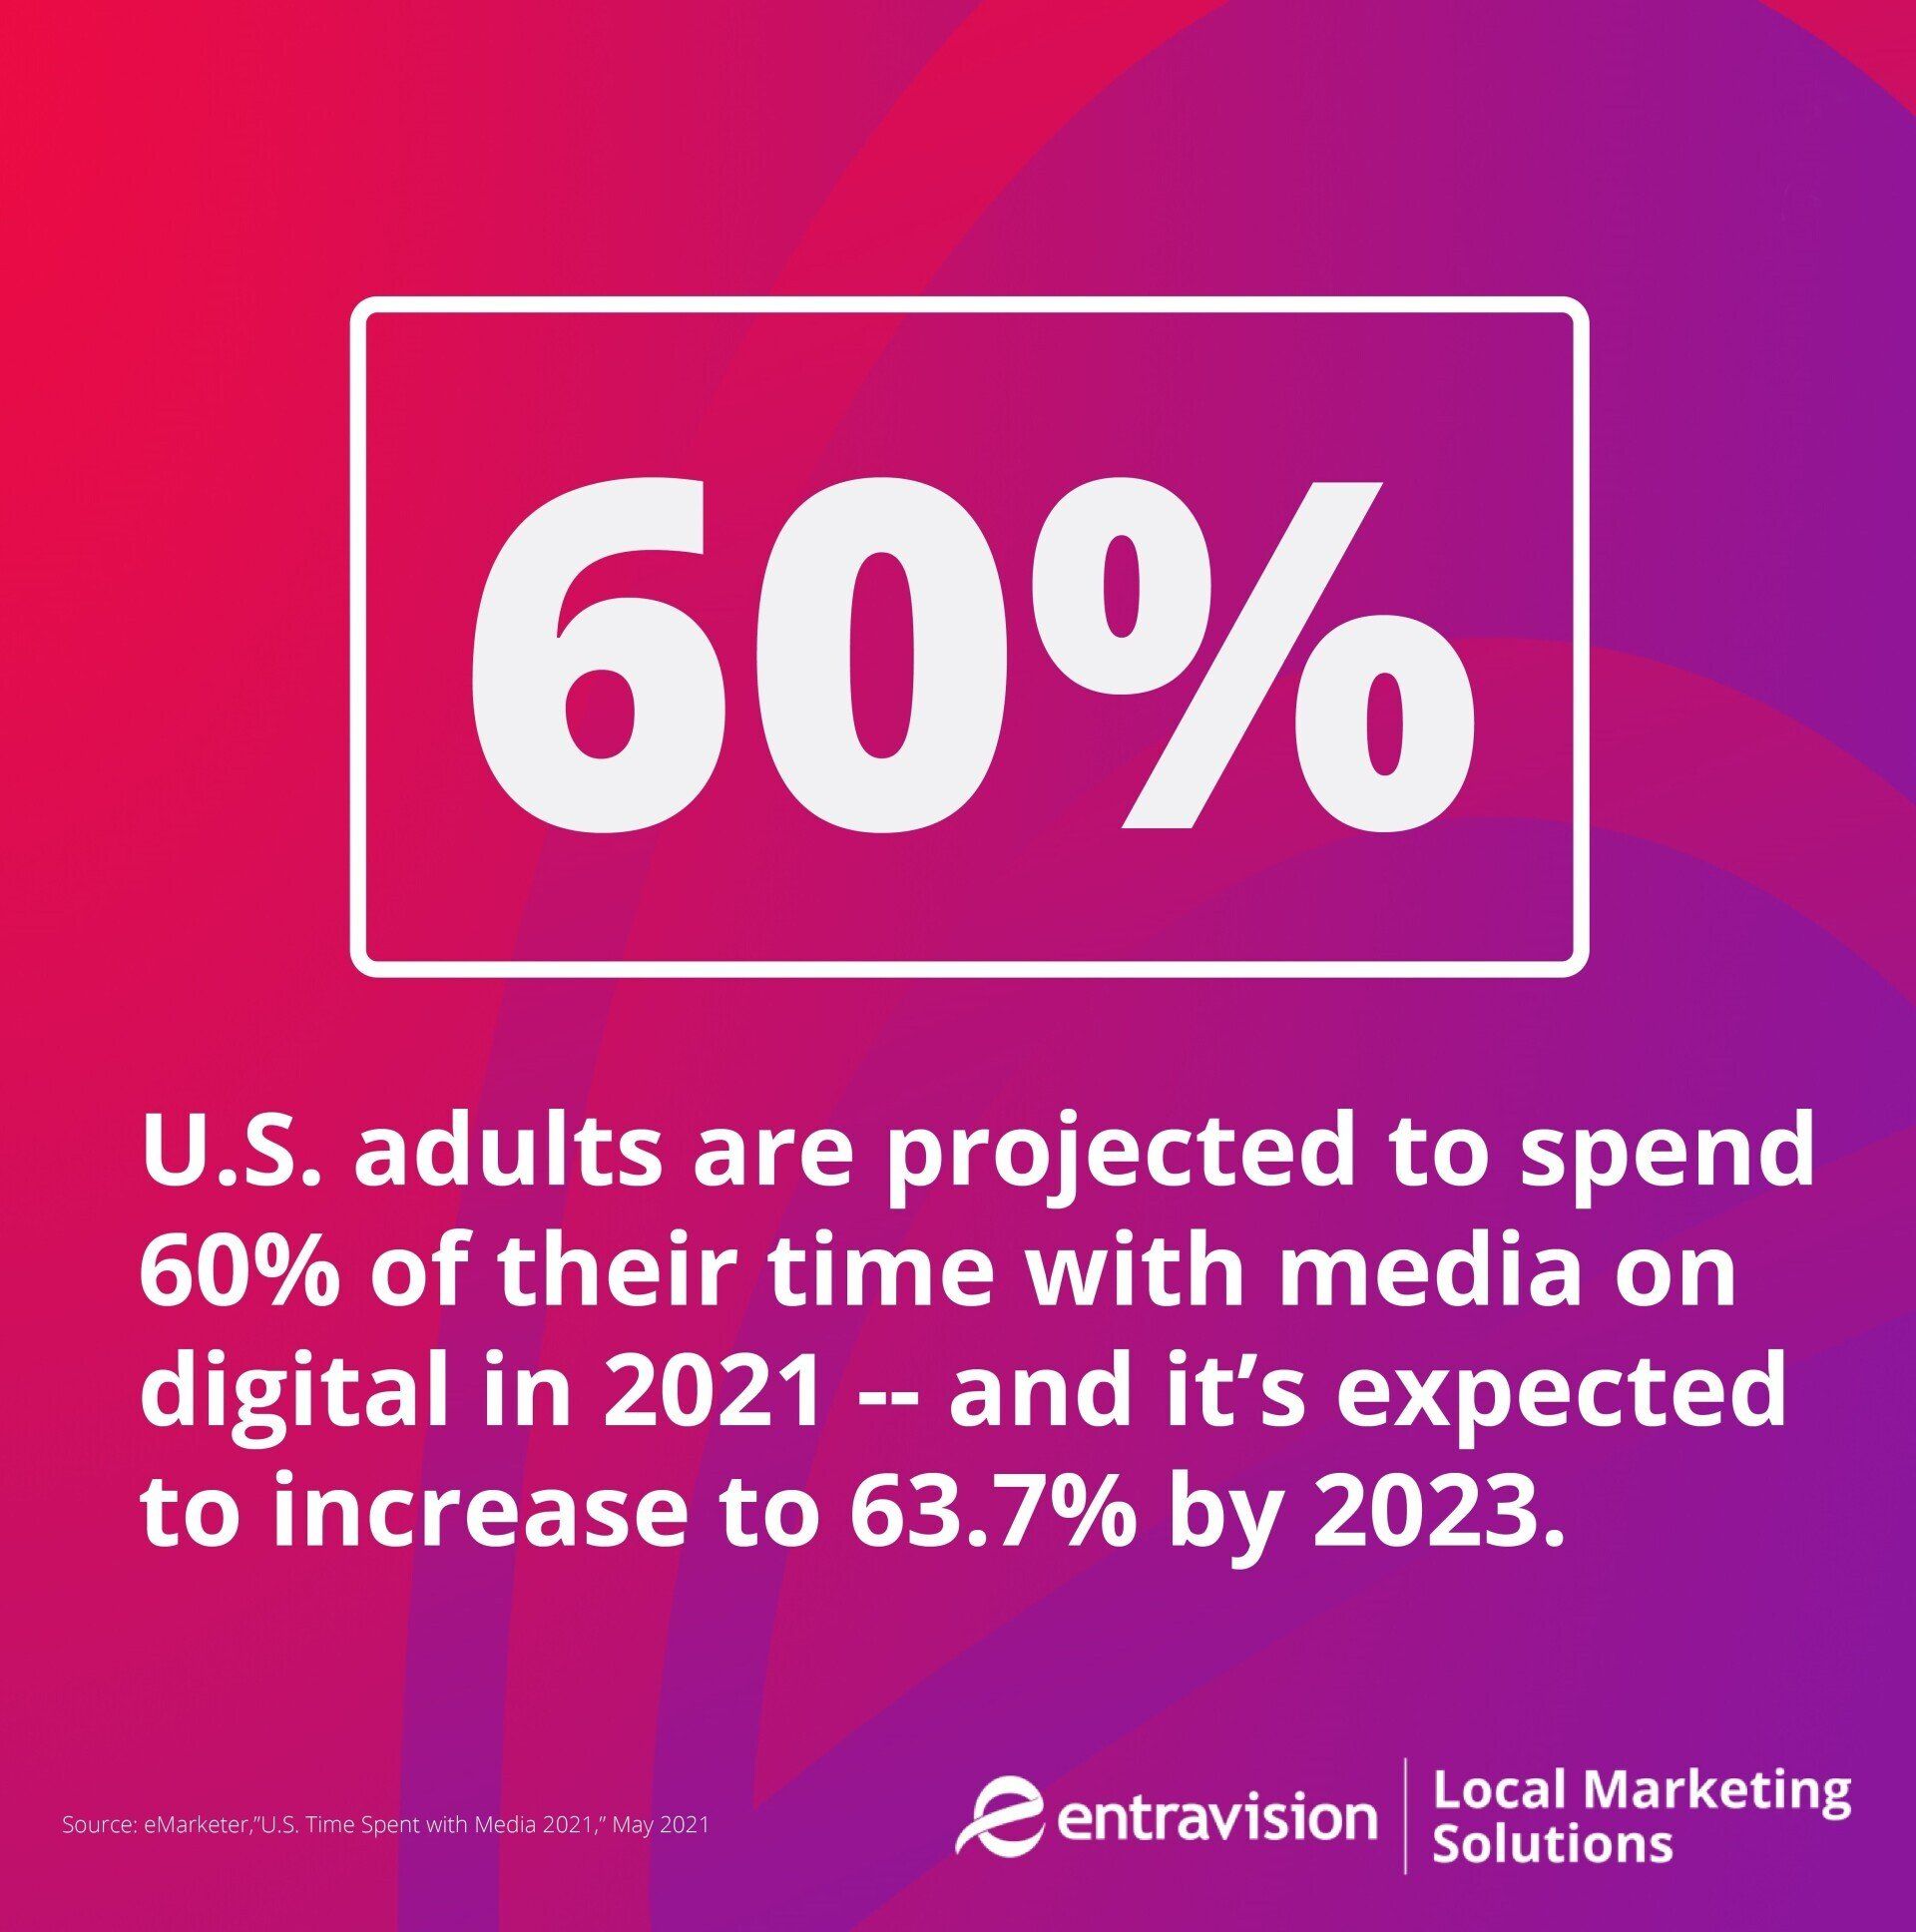 An infographic shows that adults are projected to spend 60% of their total media time with digital platforms. This makes digital marketing key to reaching them!